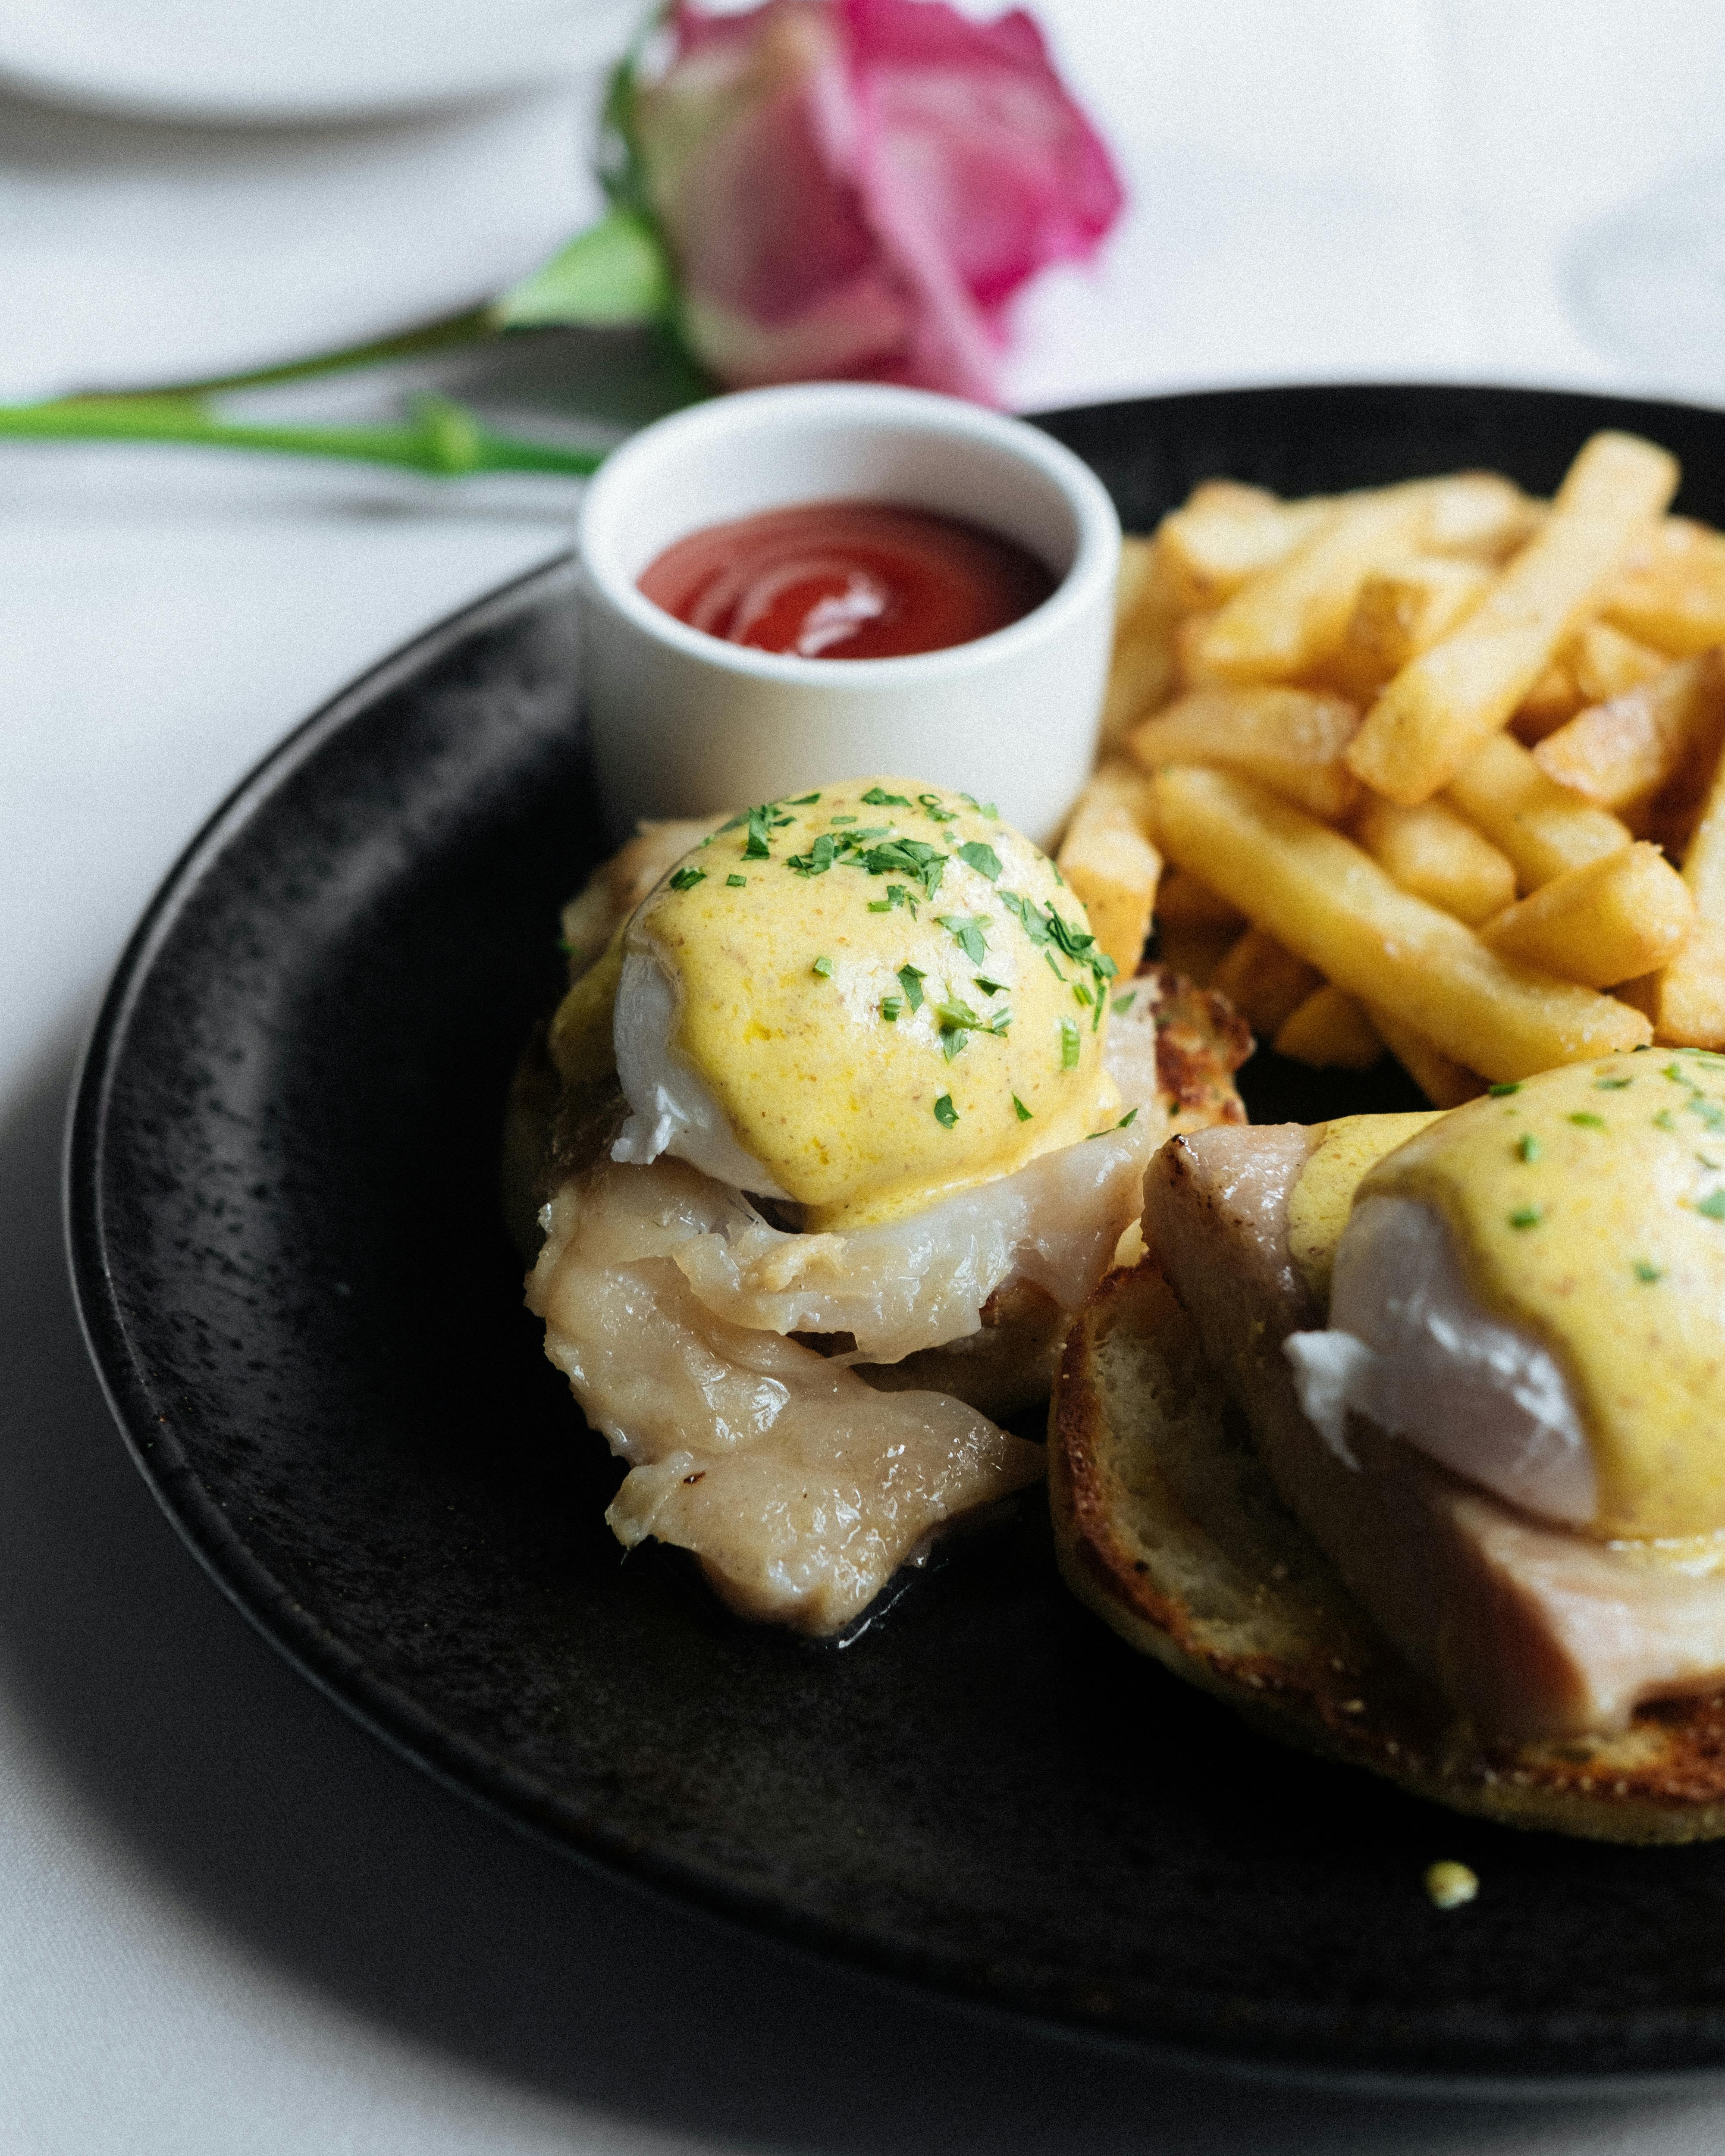 eggs benedict with french fries and salad dressing